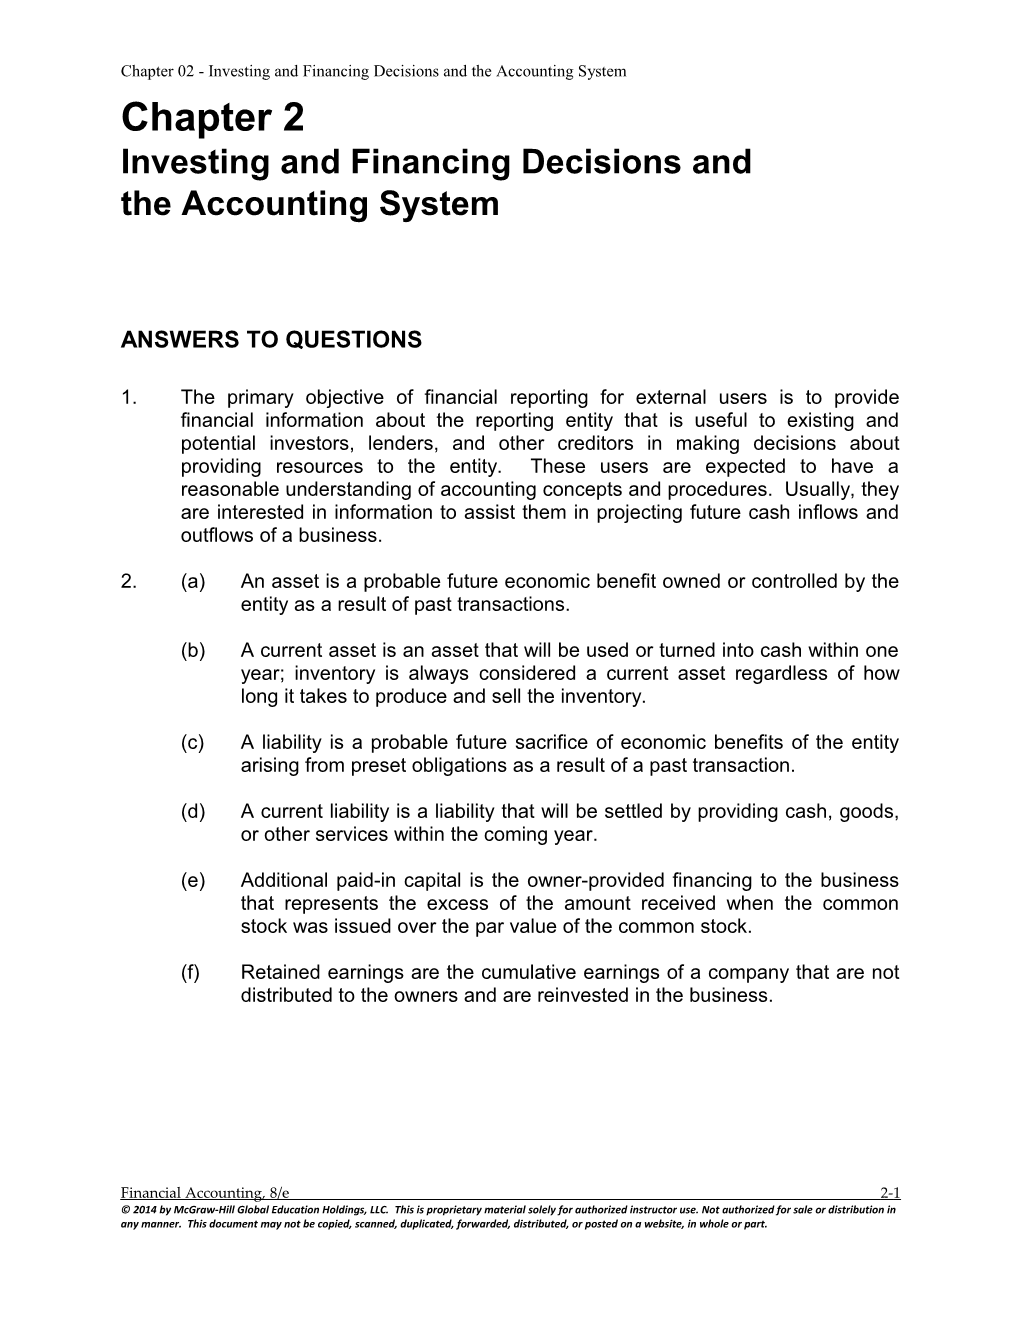 Chapter 02 - Investing and Financing Decisions and the Accounting System